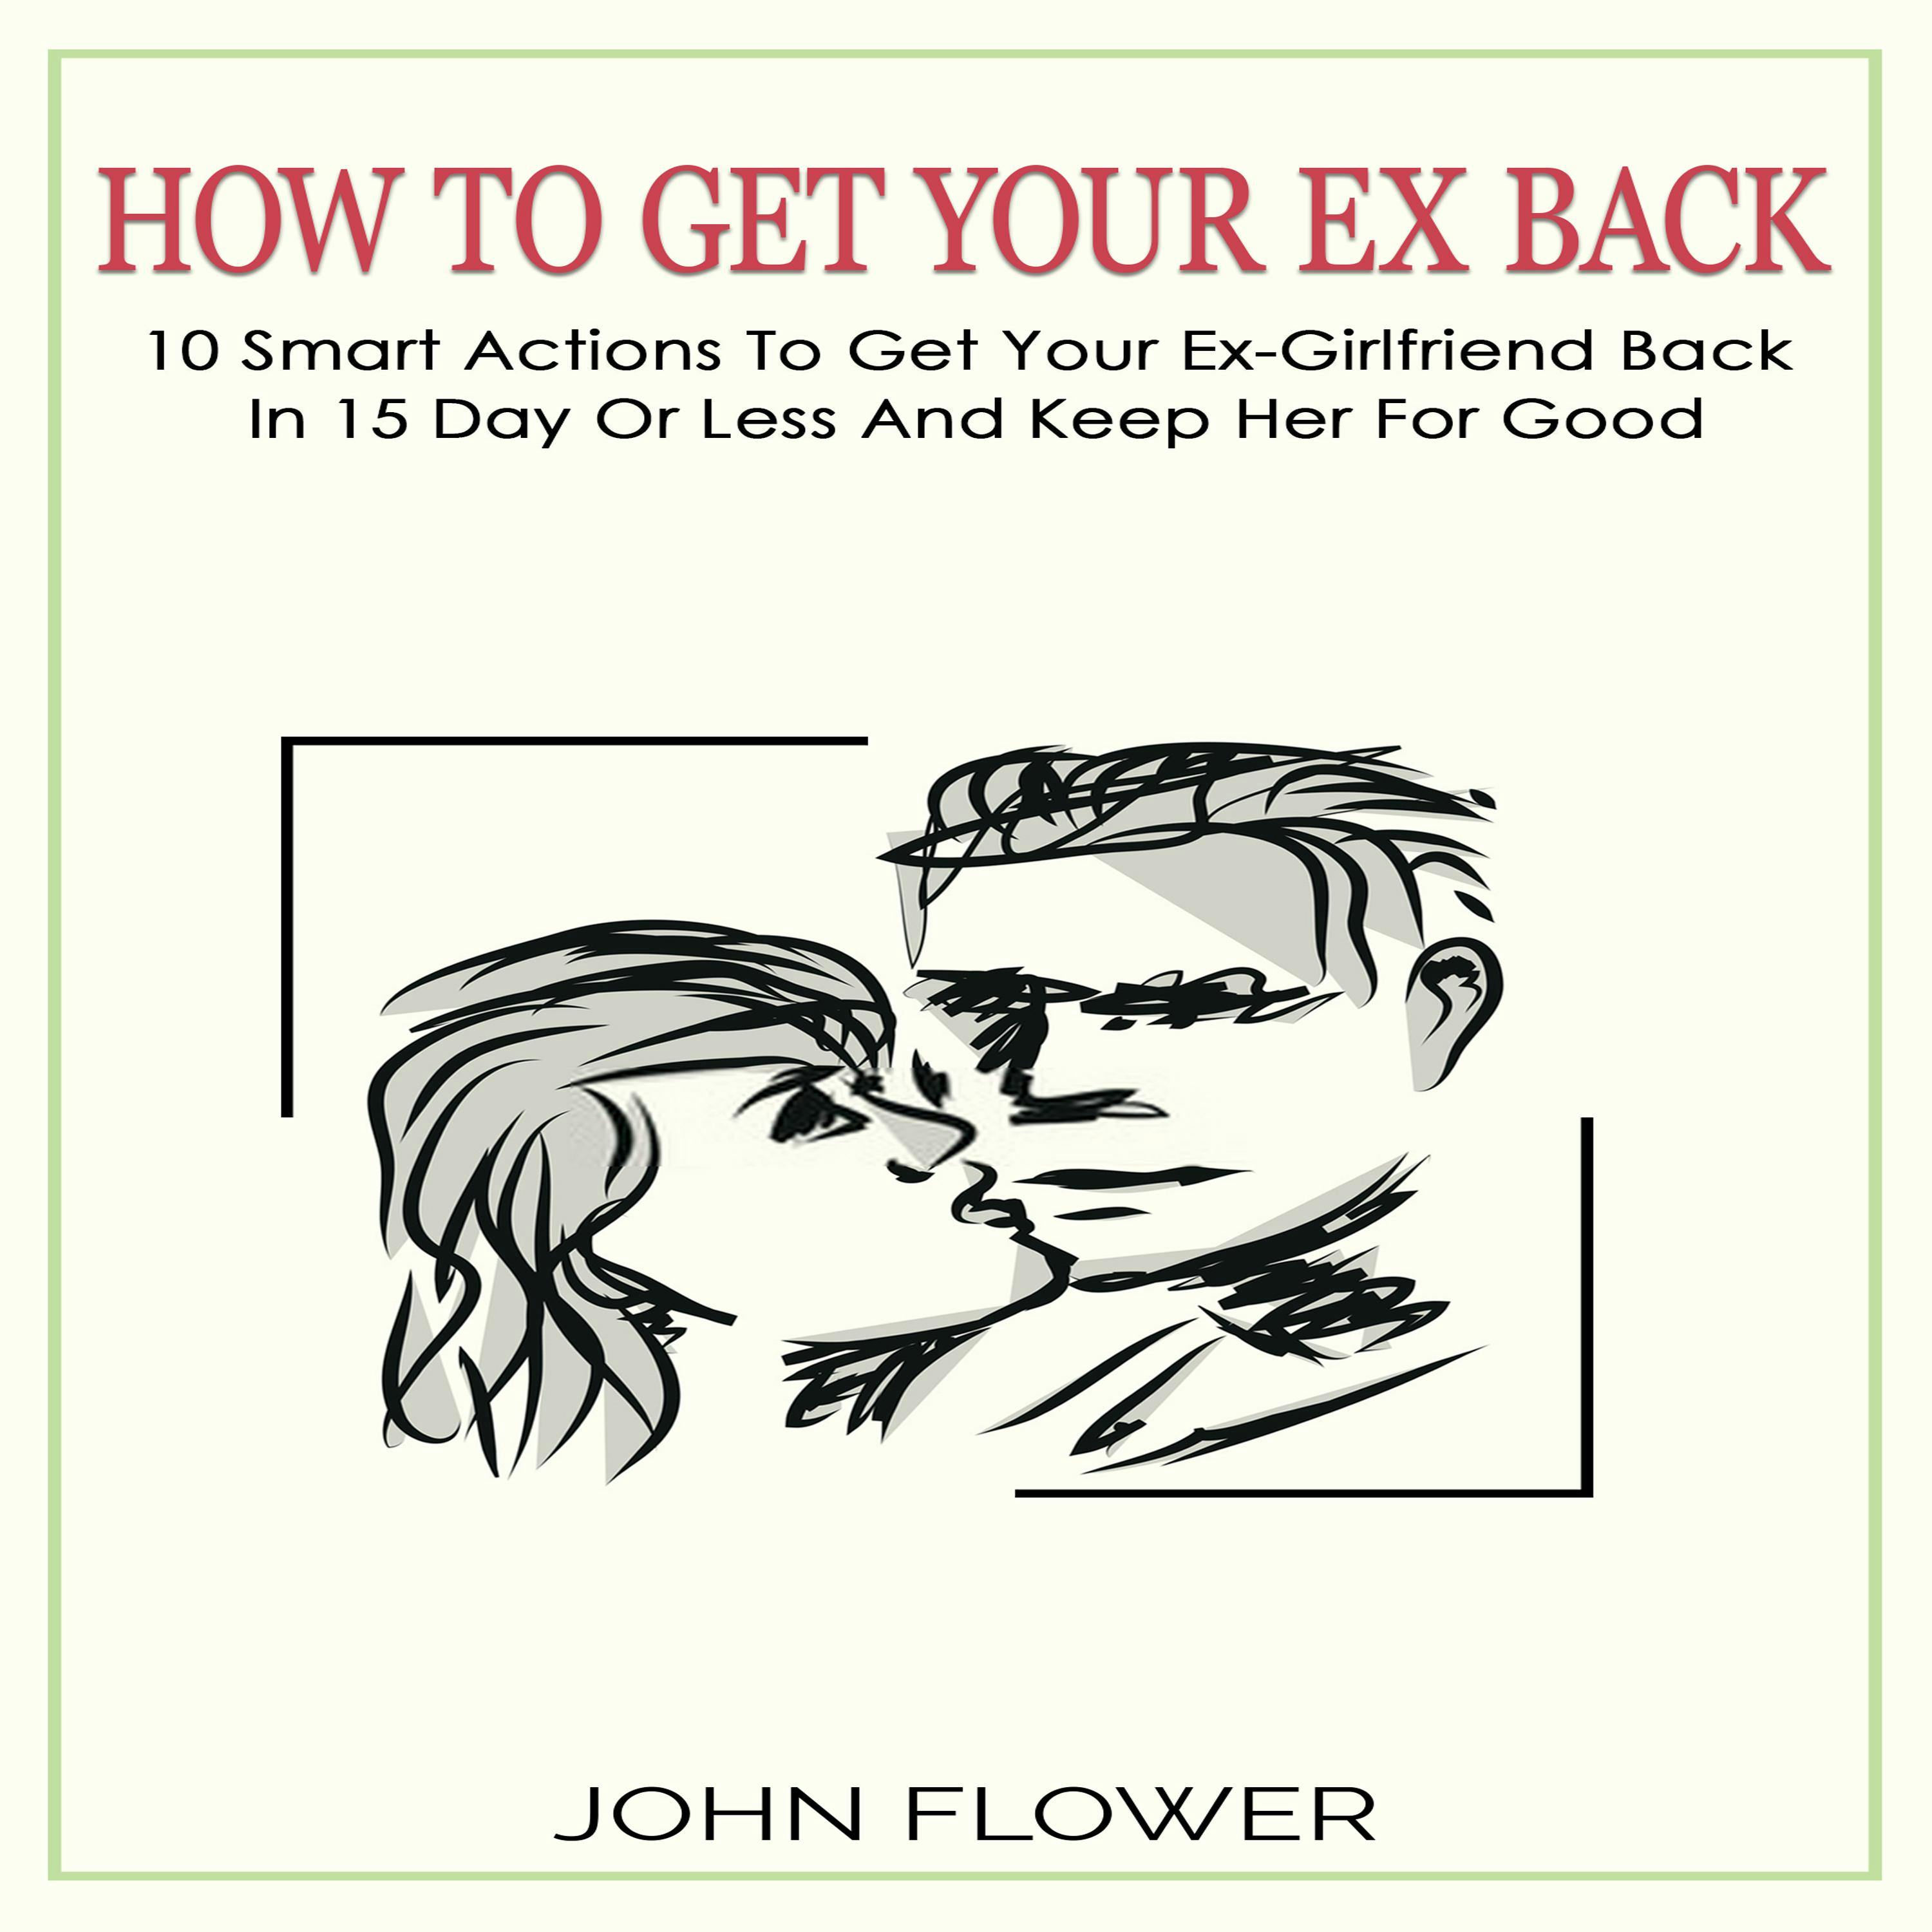 How to get your ex back: 10 smart actions to get your ex-girlfriend back in 15 day or less , and keep her for good - JOHN FLOWER